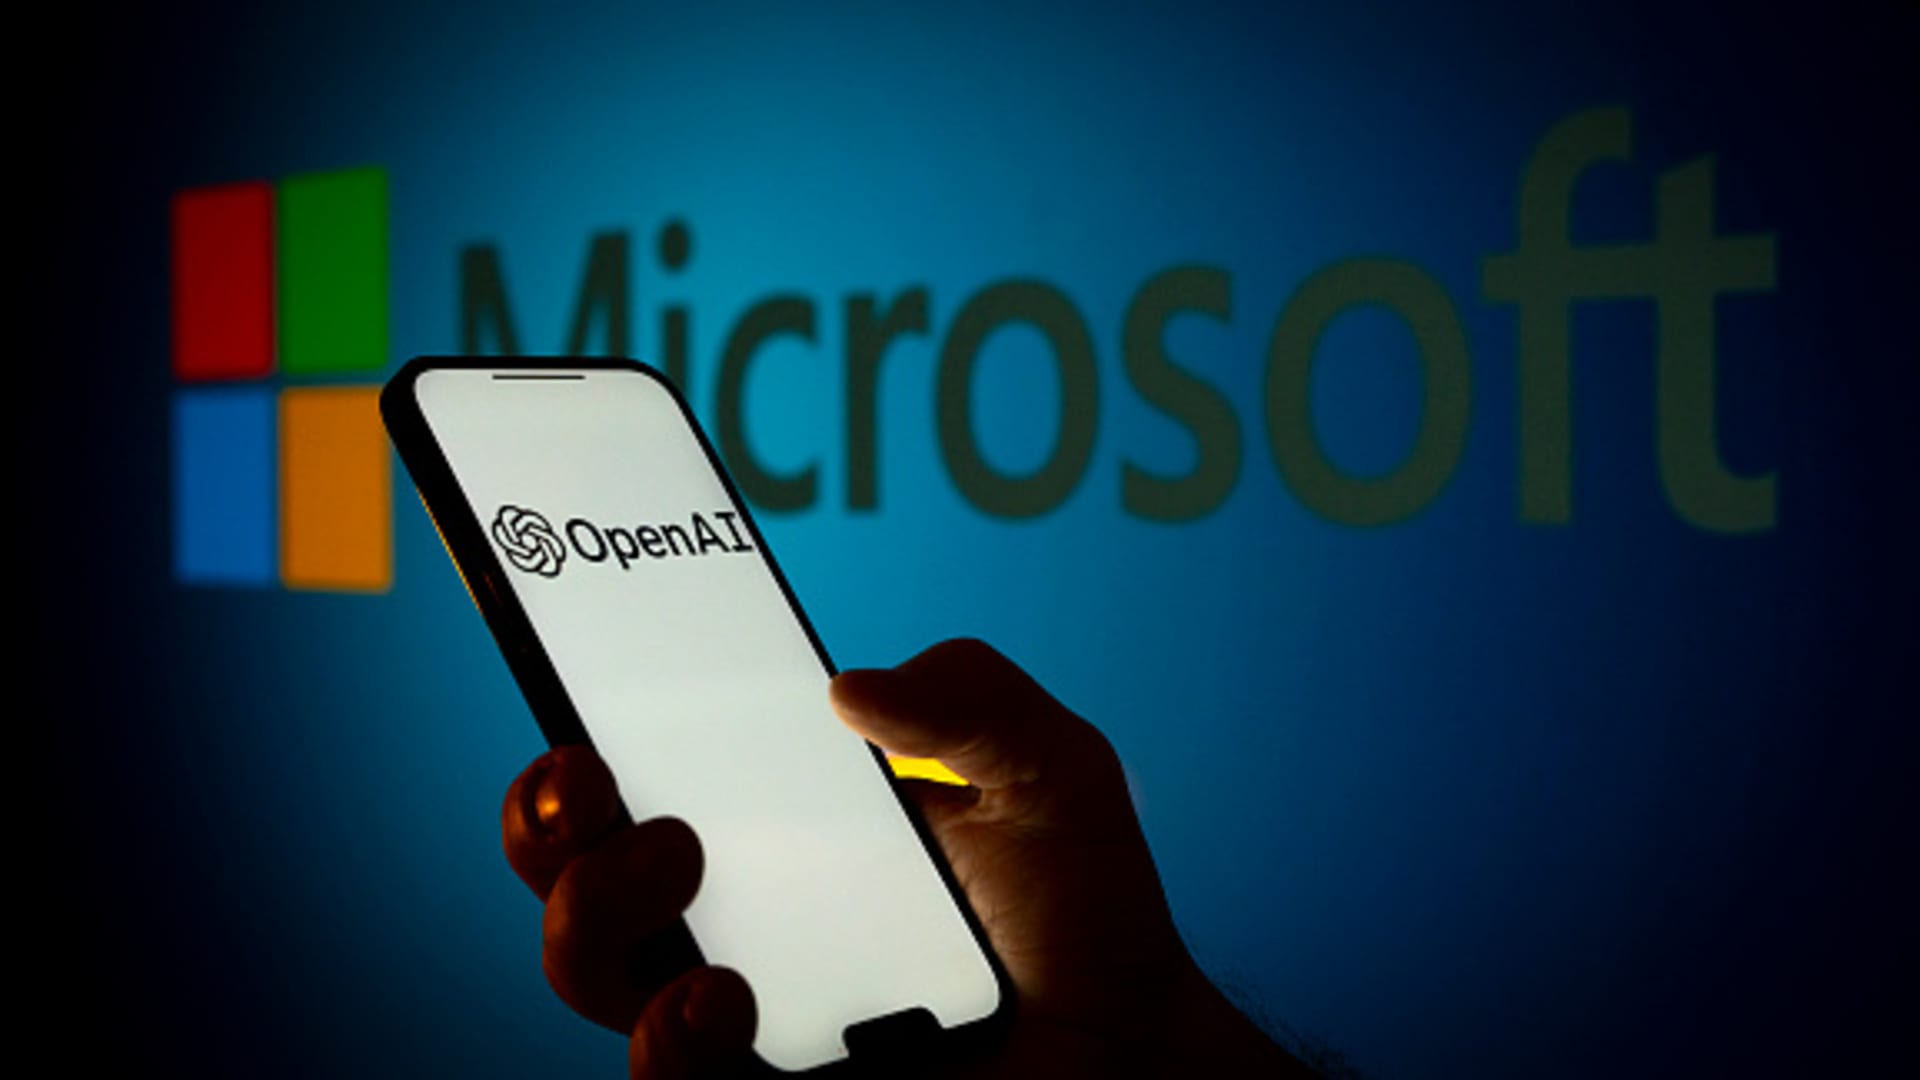 Microsoft's multibillion-dollar investment in OpenAI could face EU merger probe